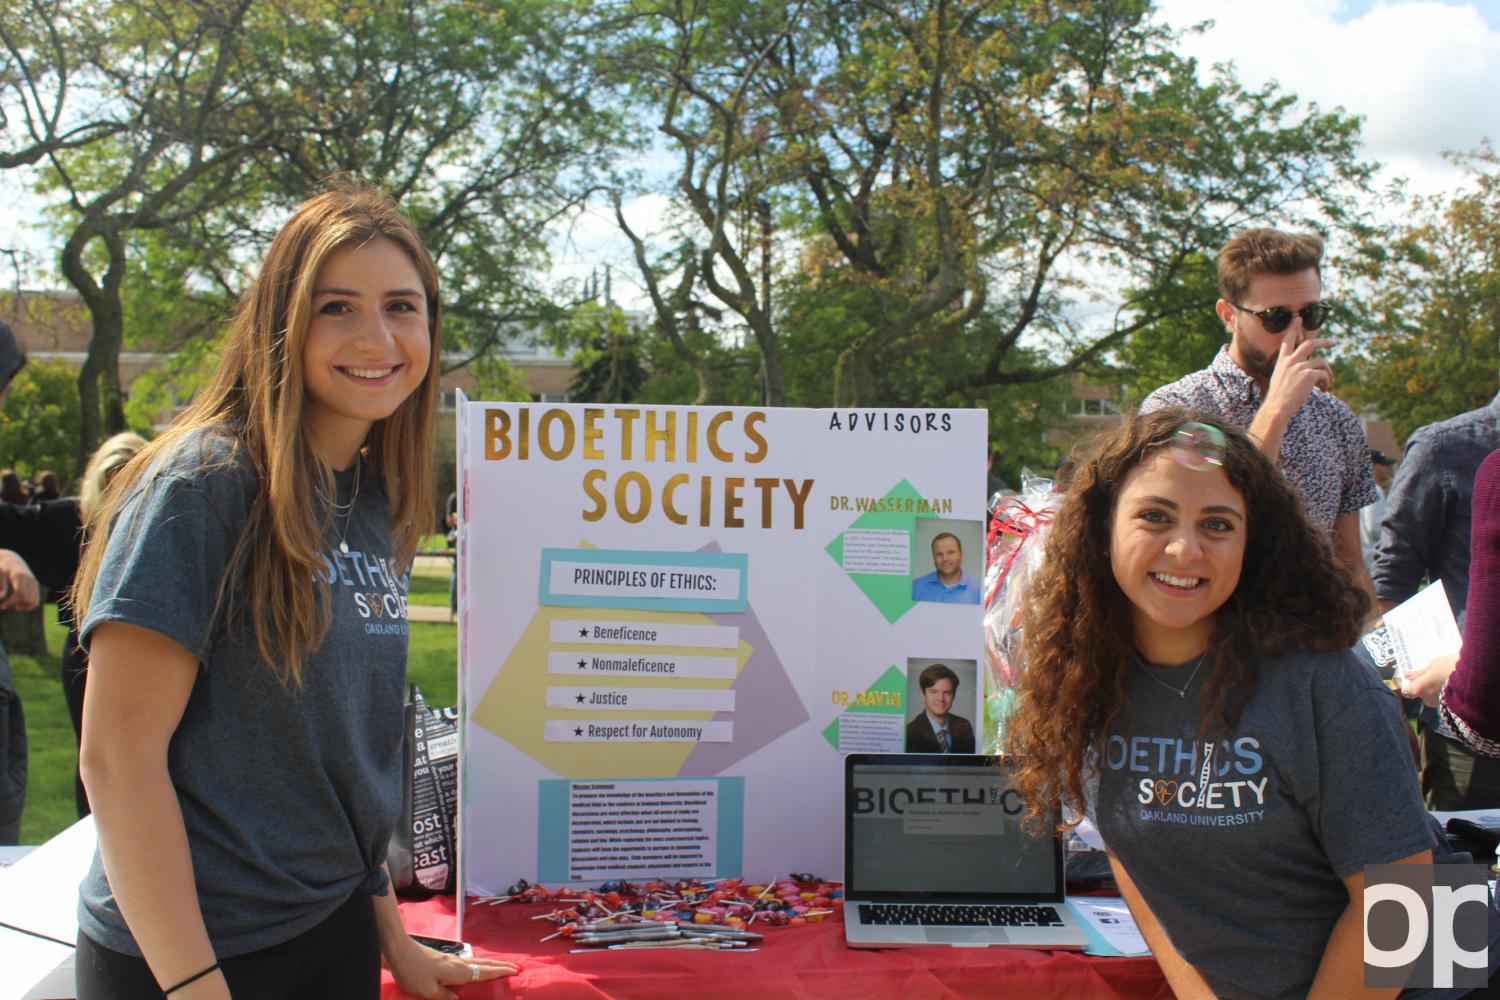 Bioethics Society plans to hold discussions and debates on issues in the science and medical world.